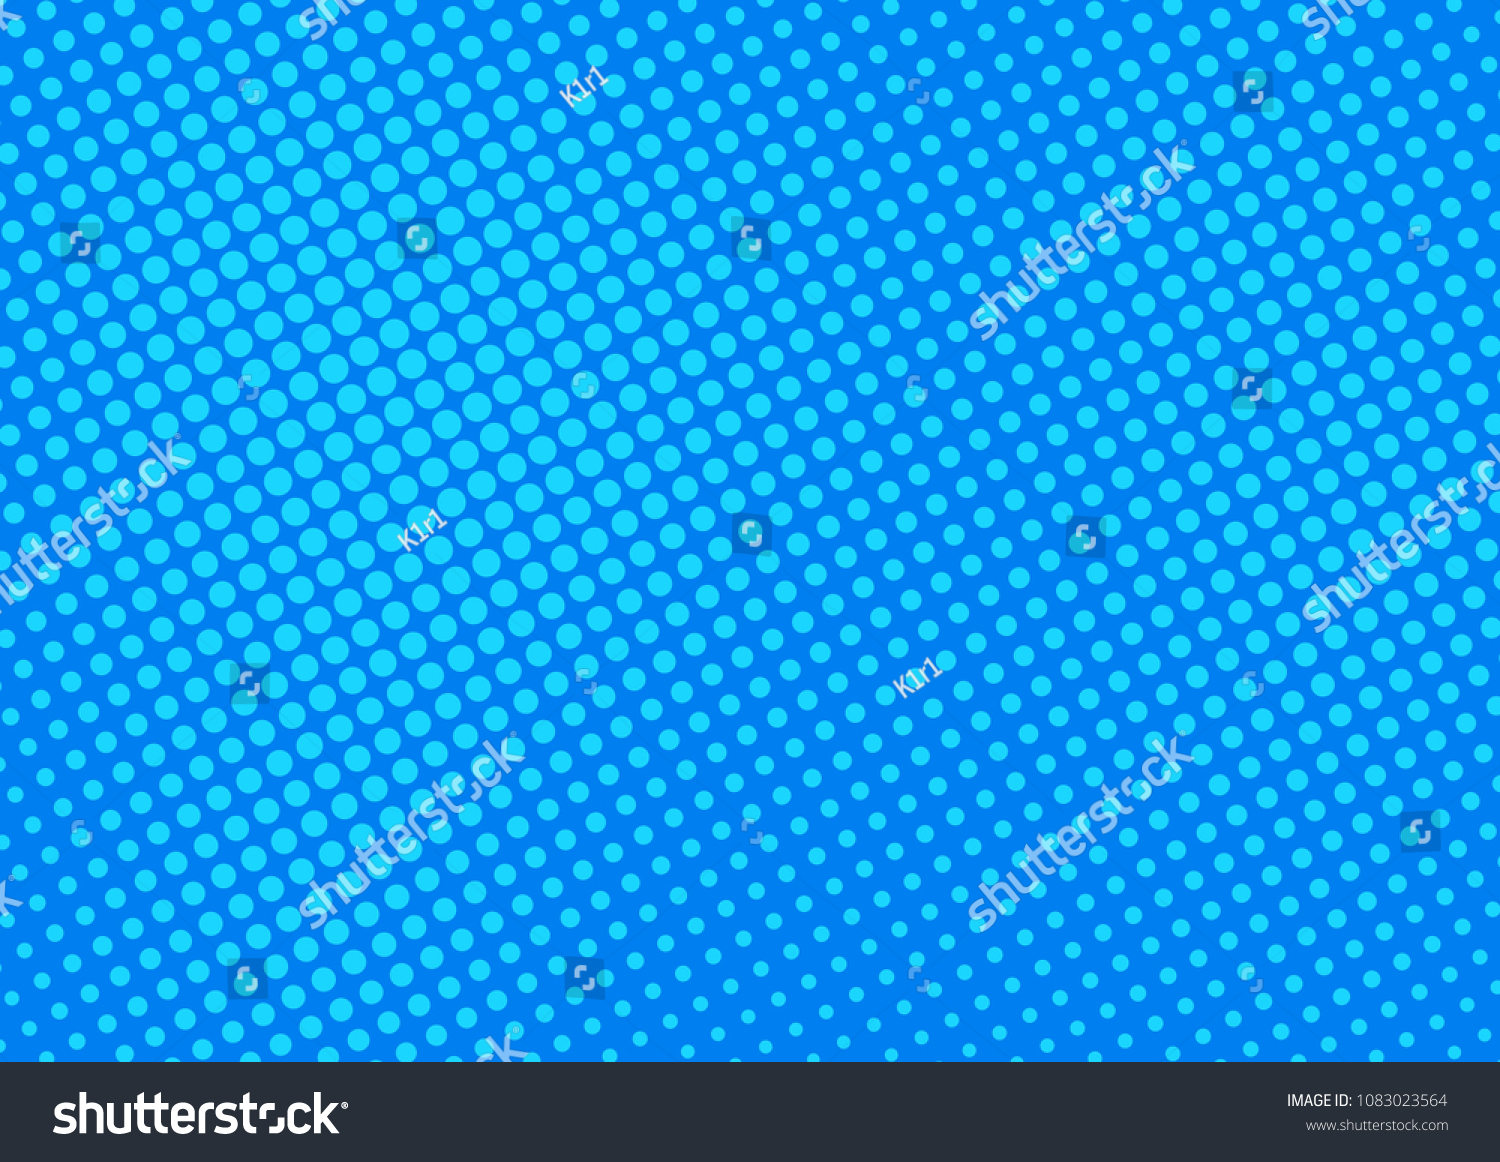 Blue Comic Popart Halftone Background Vector Stock Vector Royalty Free Shutterstock